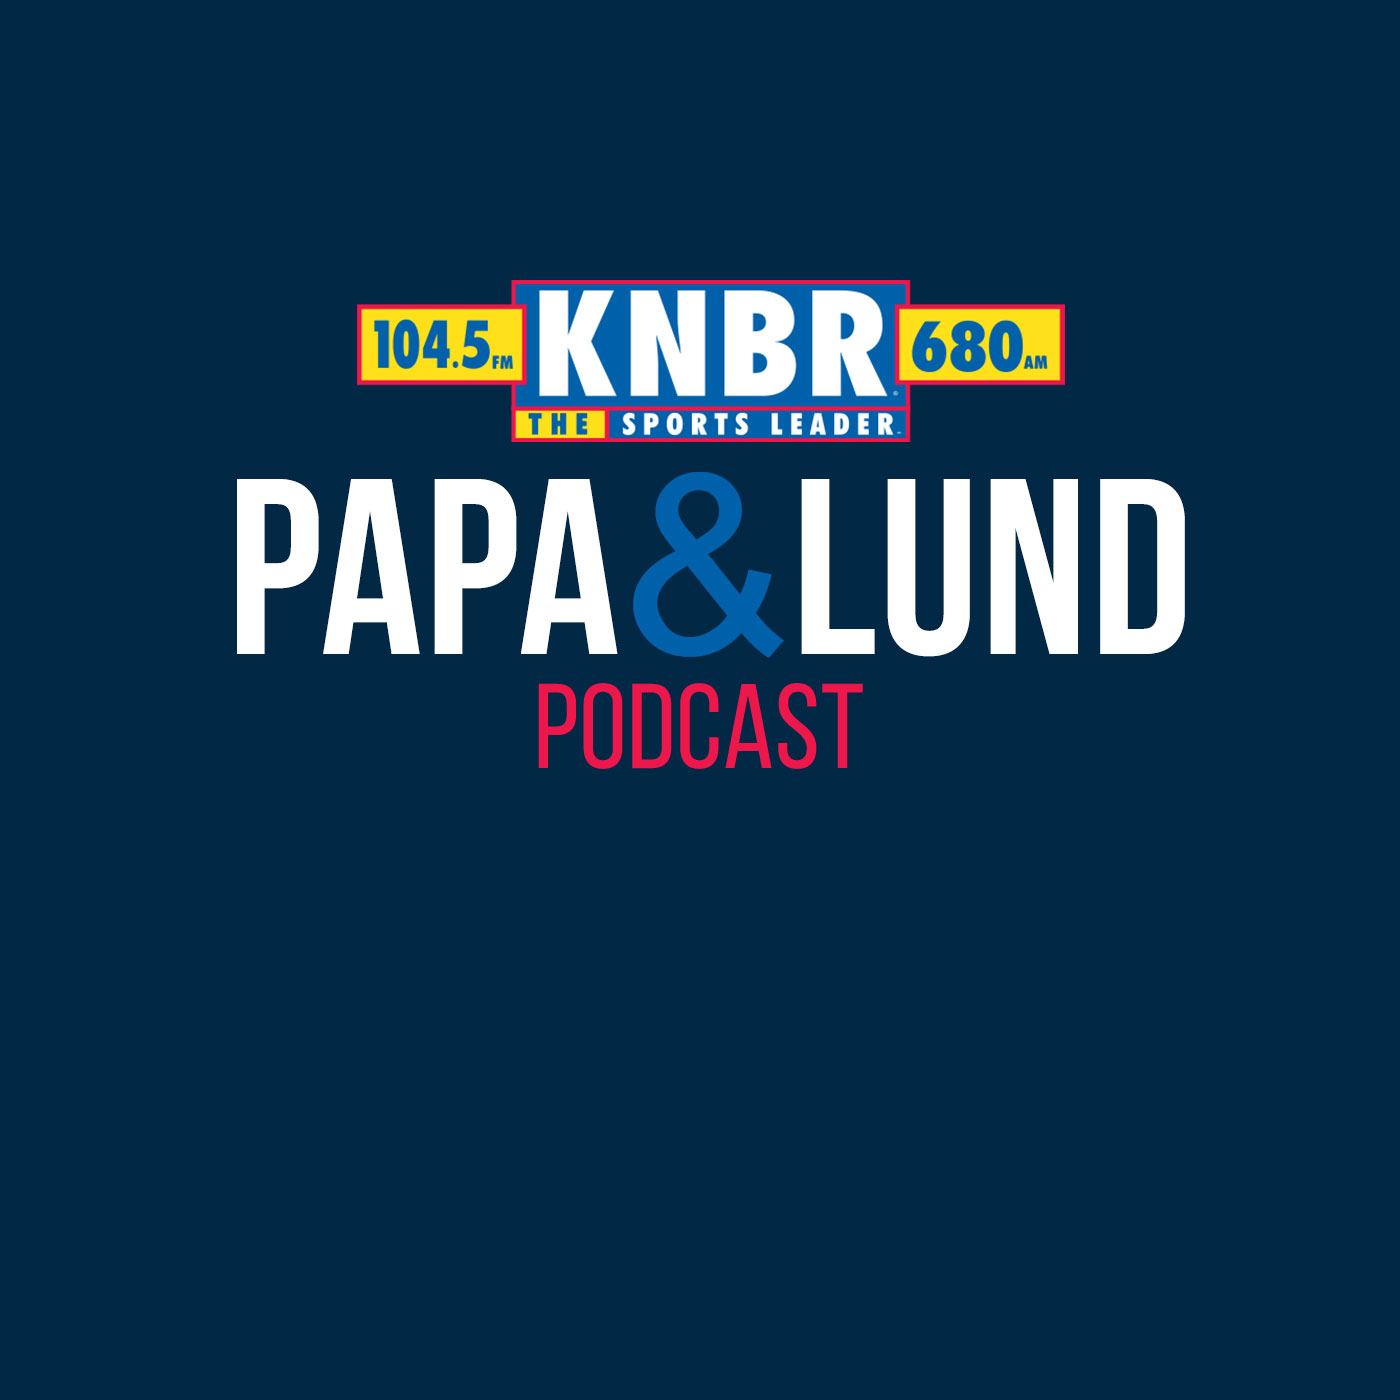 6-20 Marty Lurie joins Papa & J.D. and shares some of his favorite interactions and memories  of Willie Mays  over the years